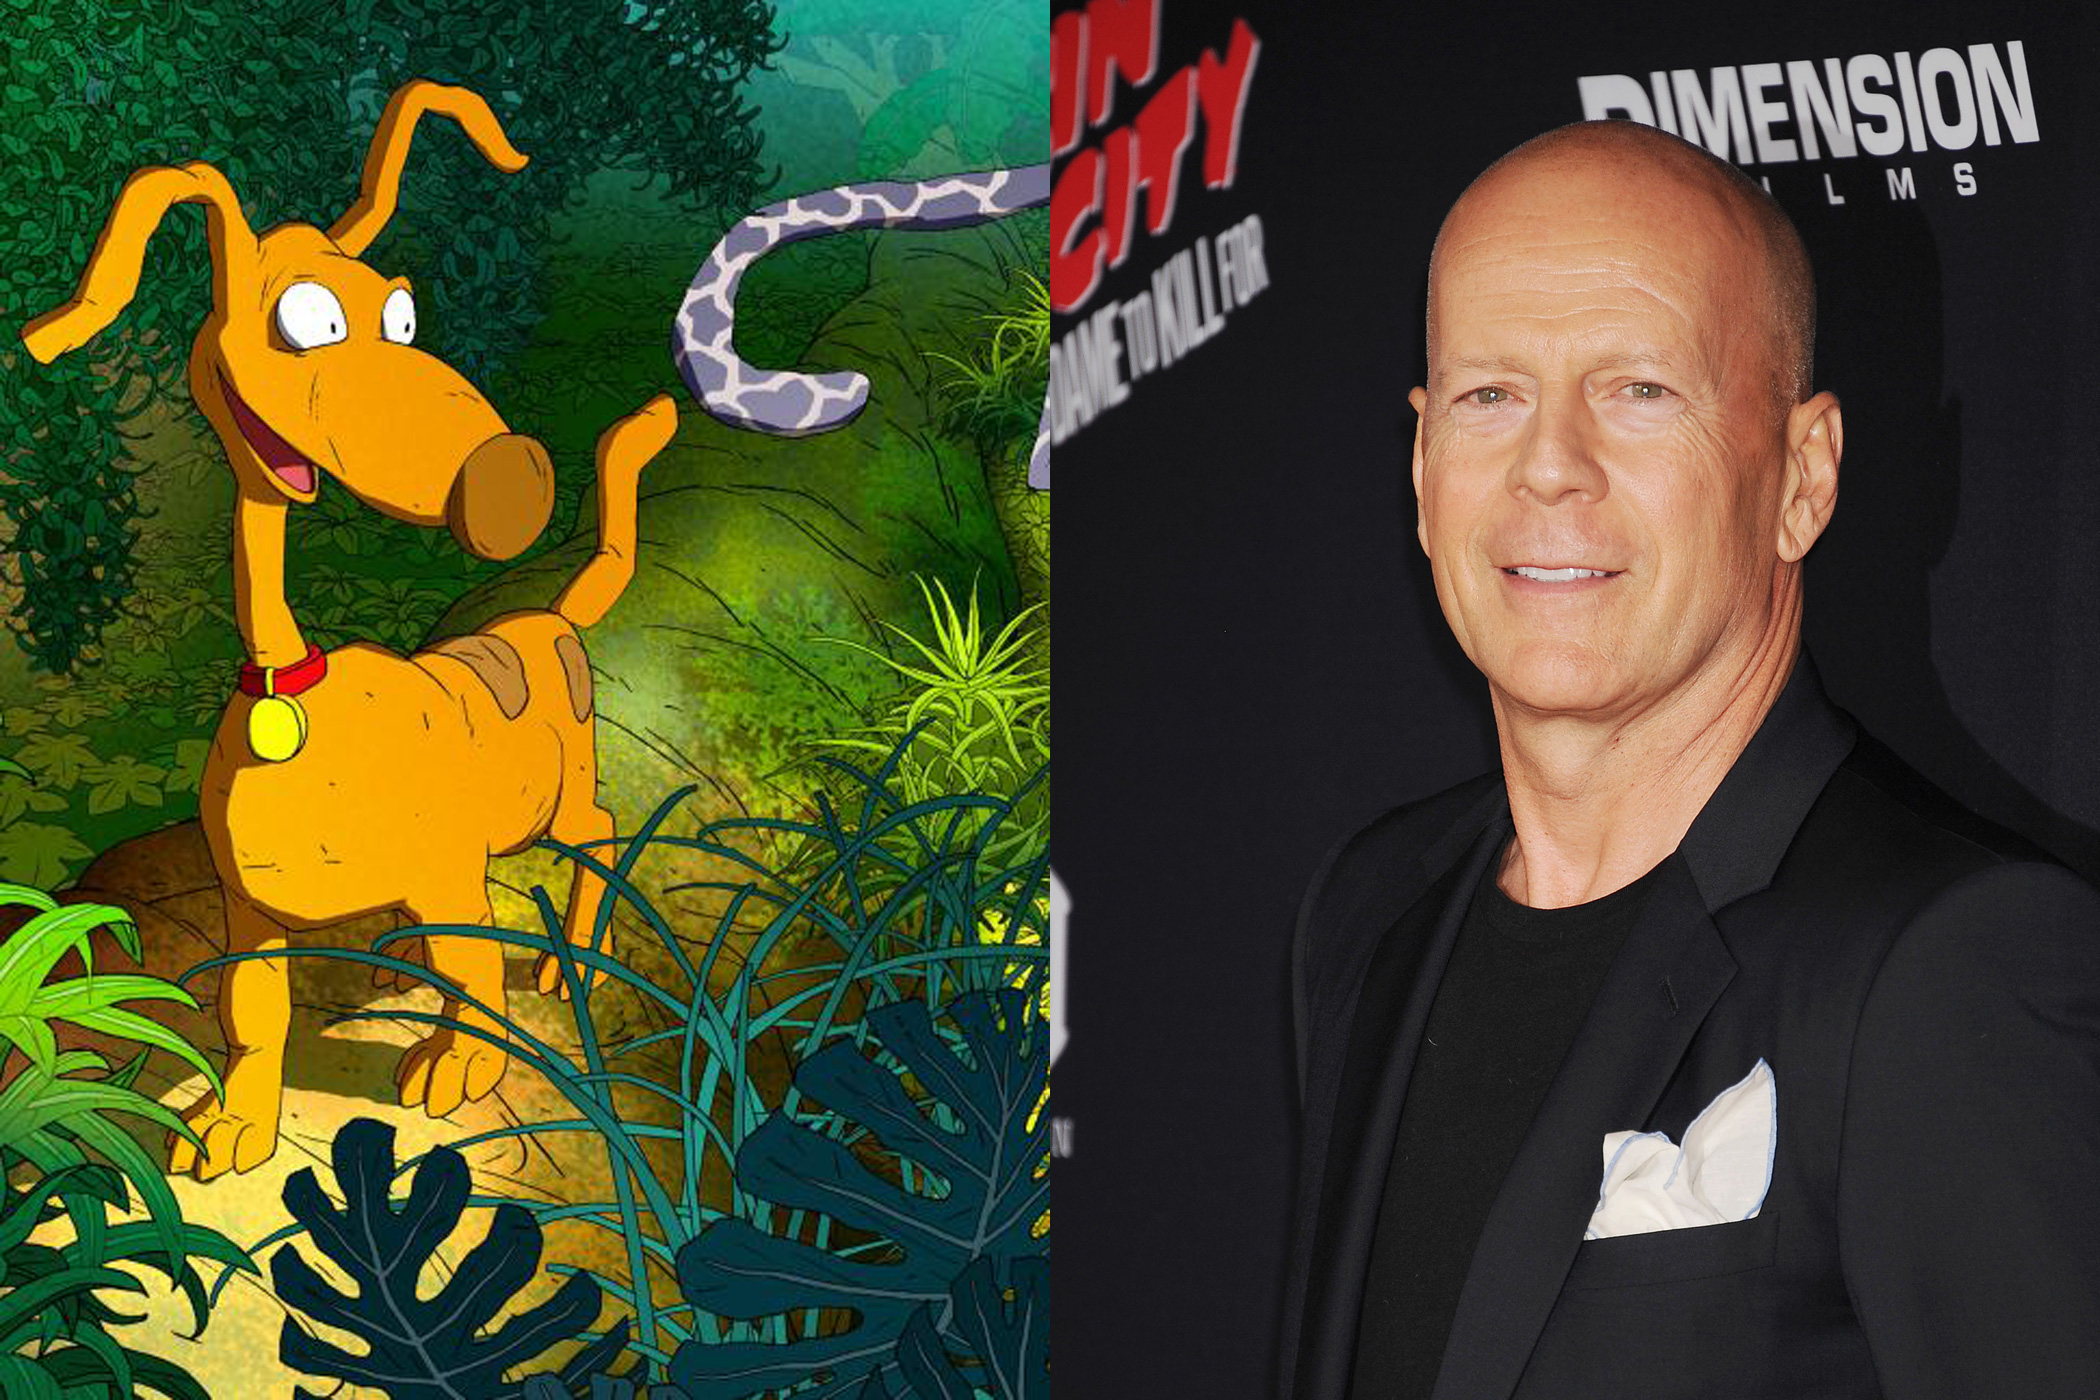 Bruce Willis had a brief voice acting cameo as the voice of Spike in the 2003 movie Rugrats Go Wild.